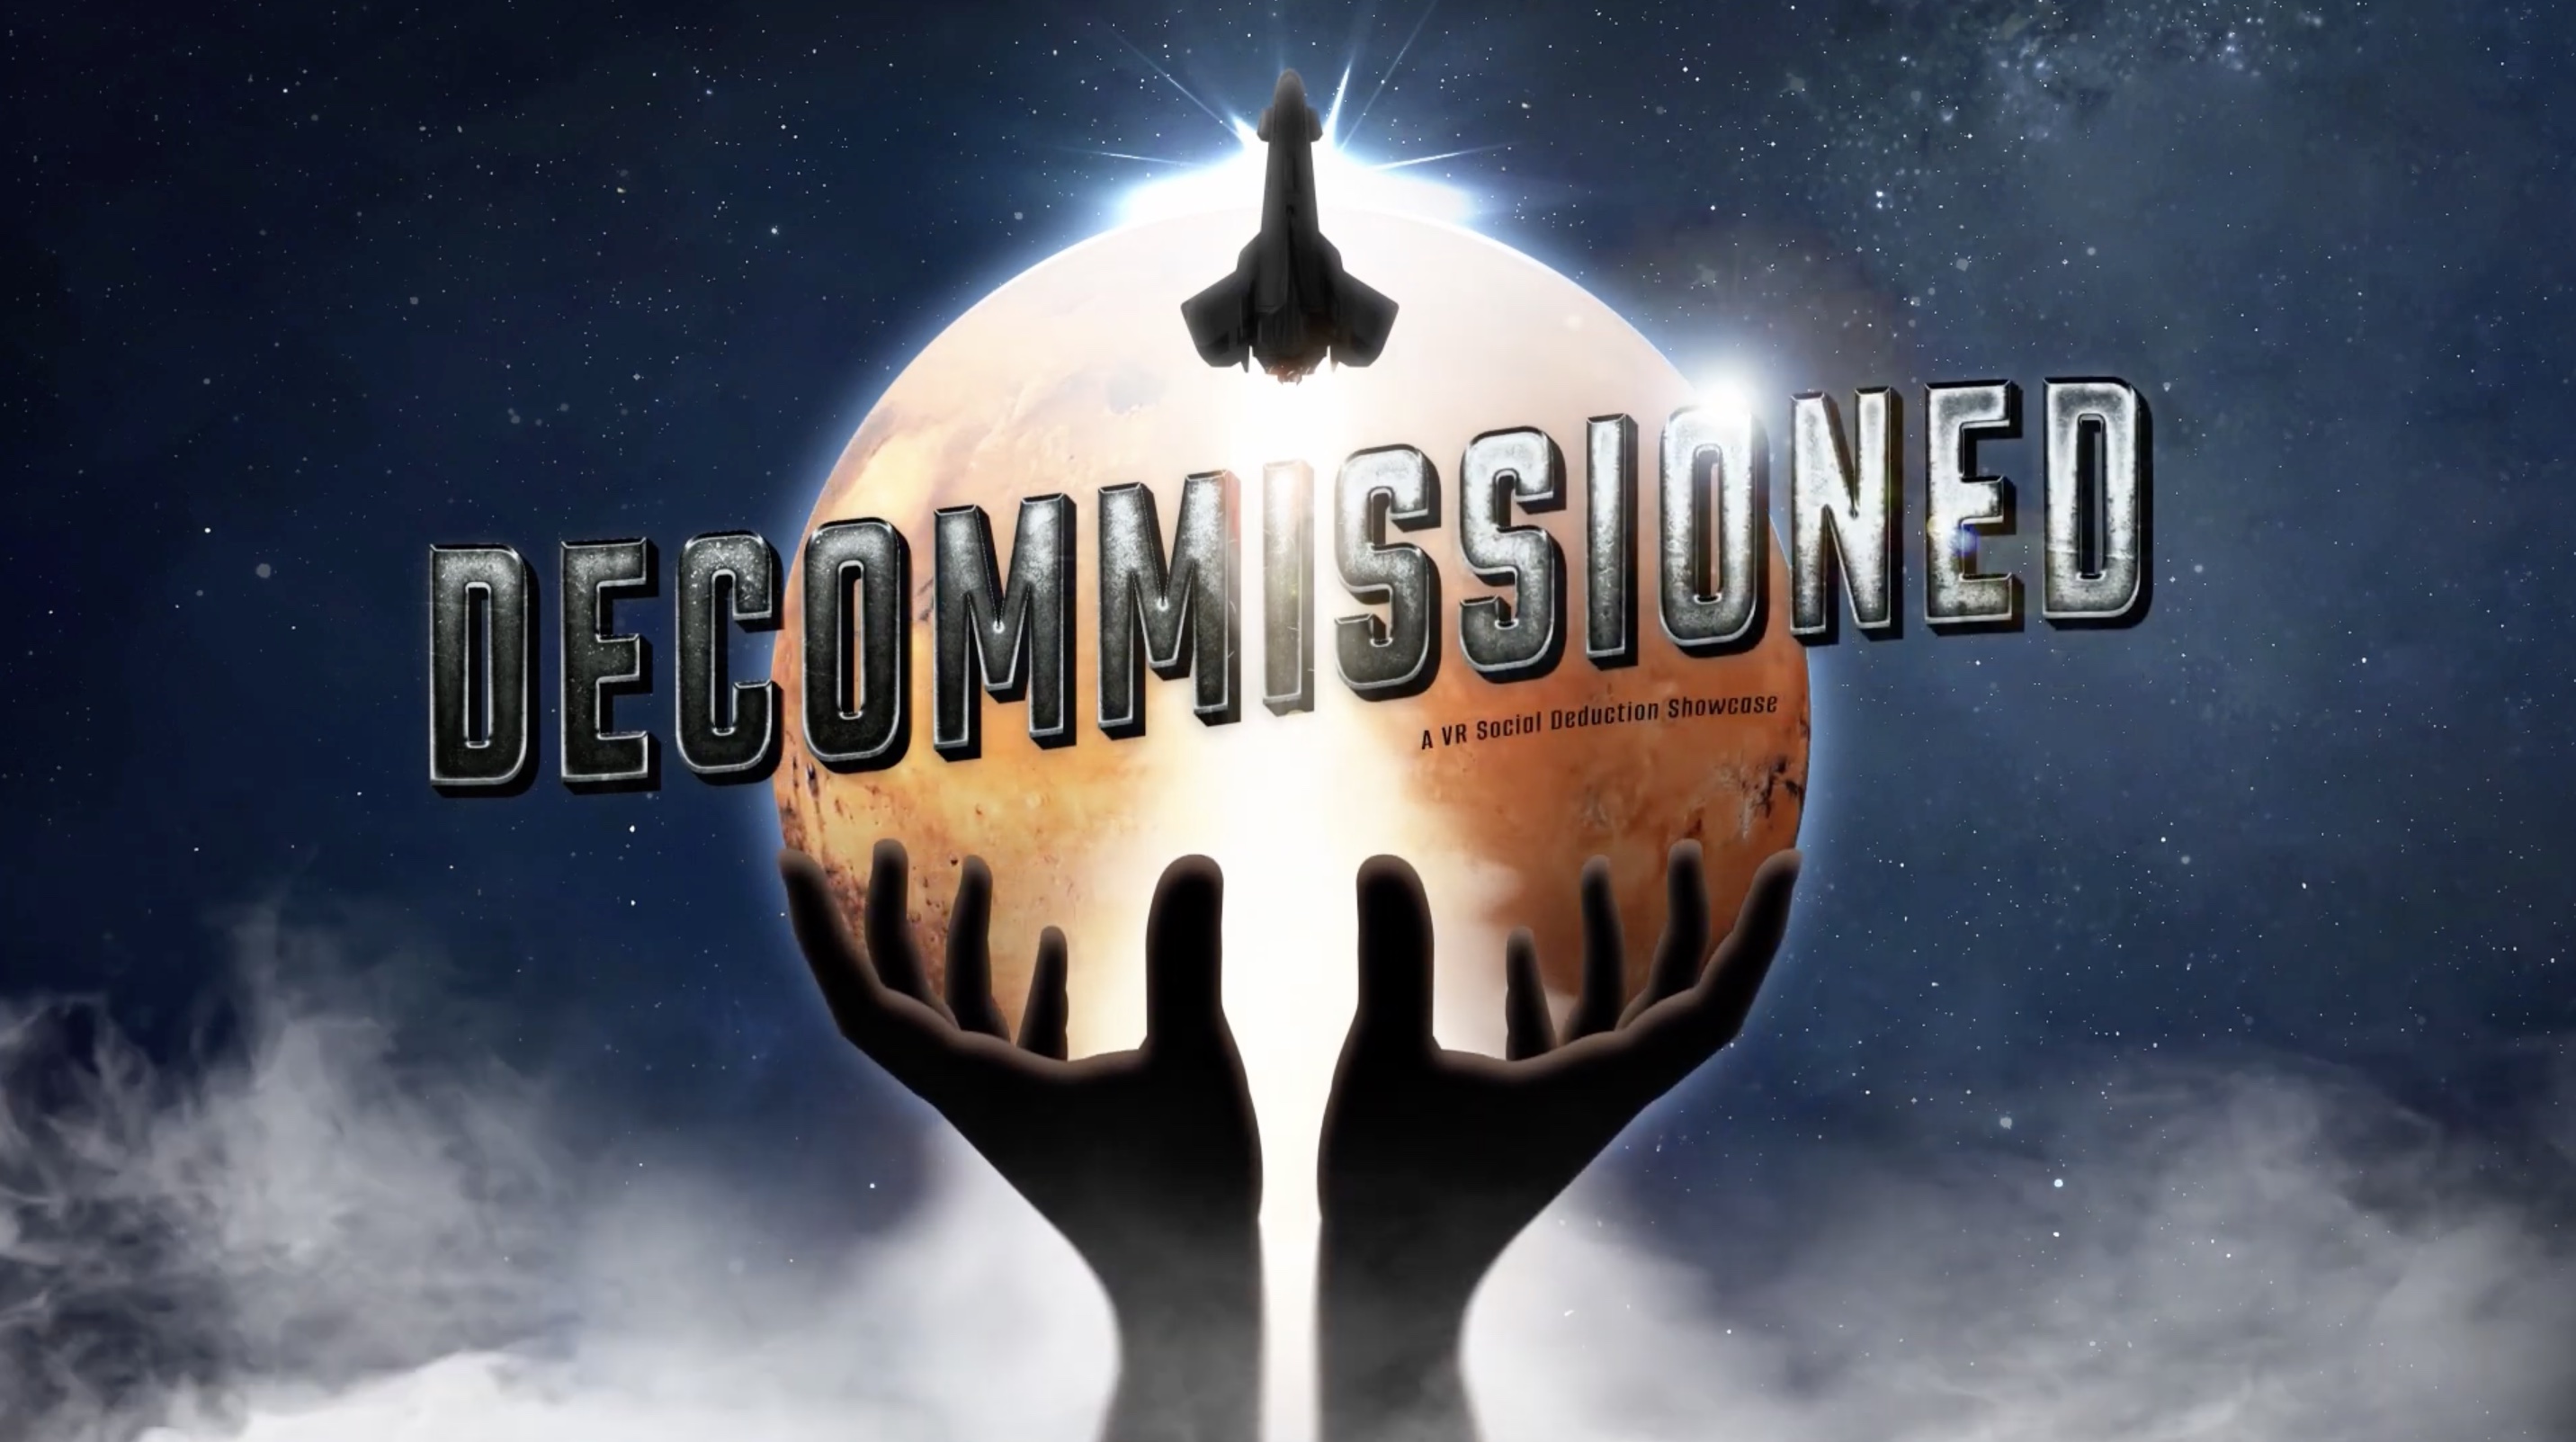 Try out Meta’s new VR showcase app ‘Decommissioned’